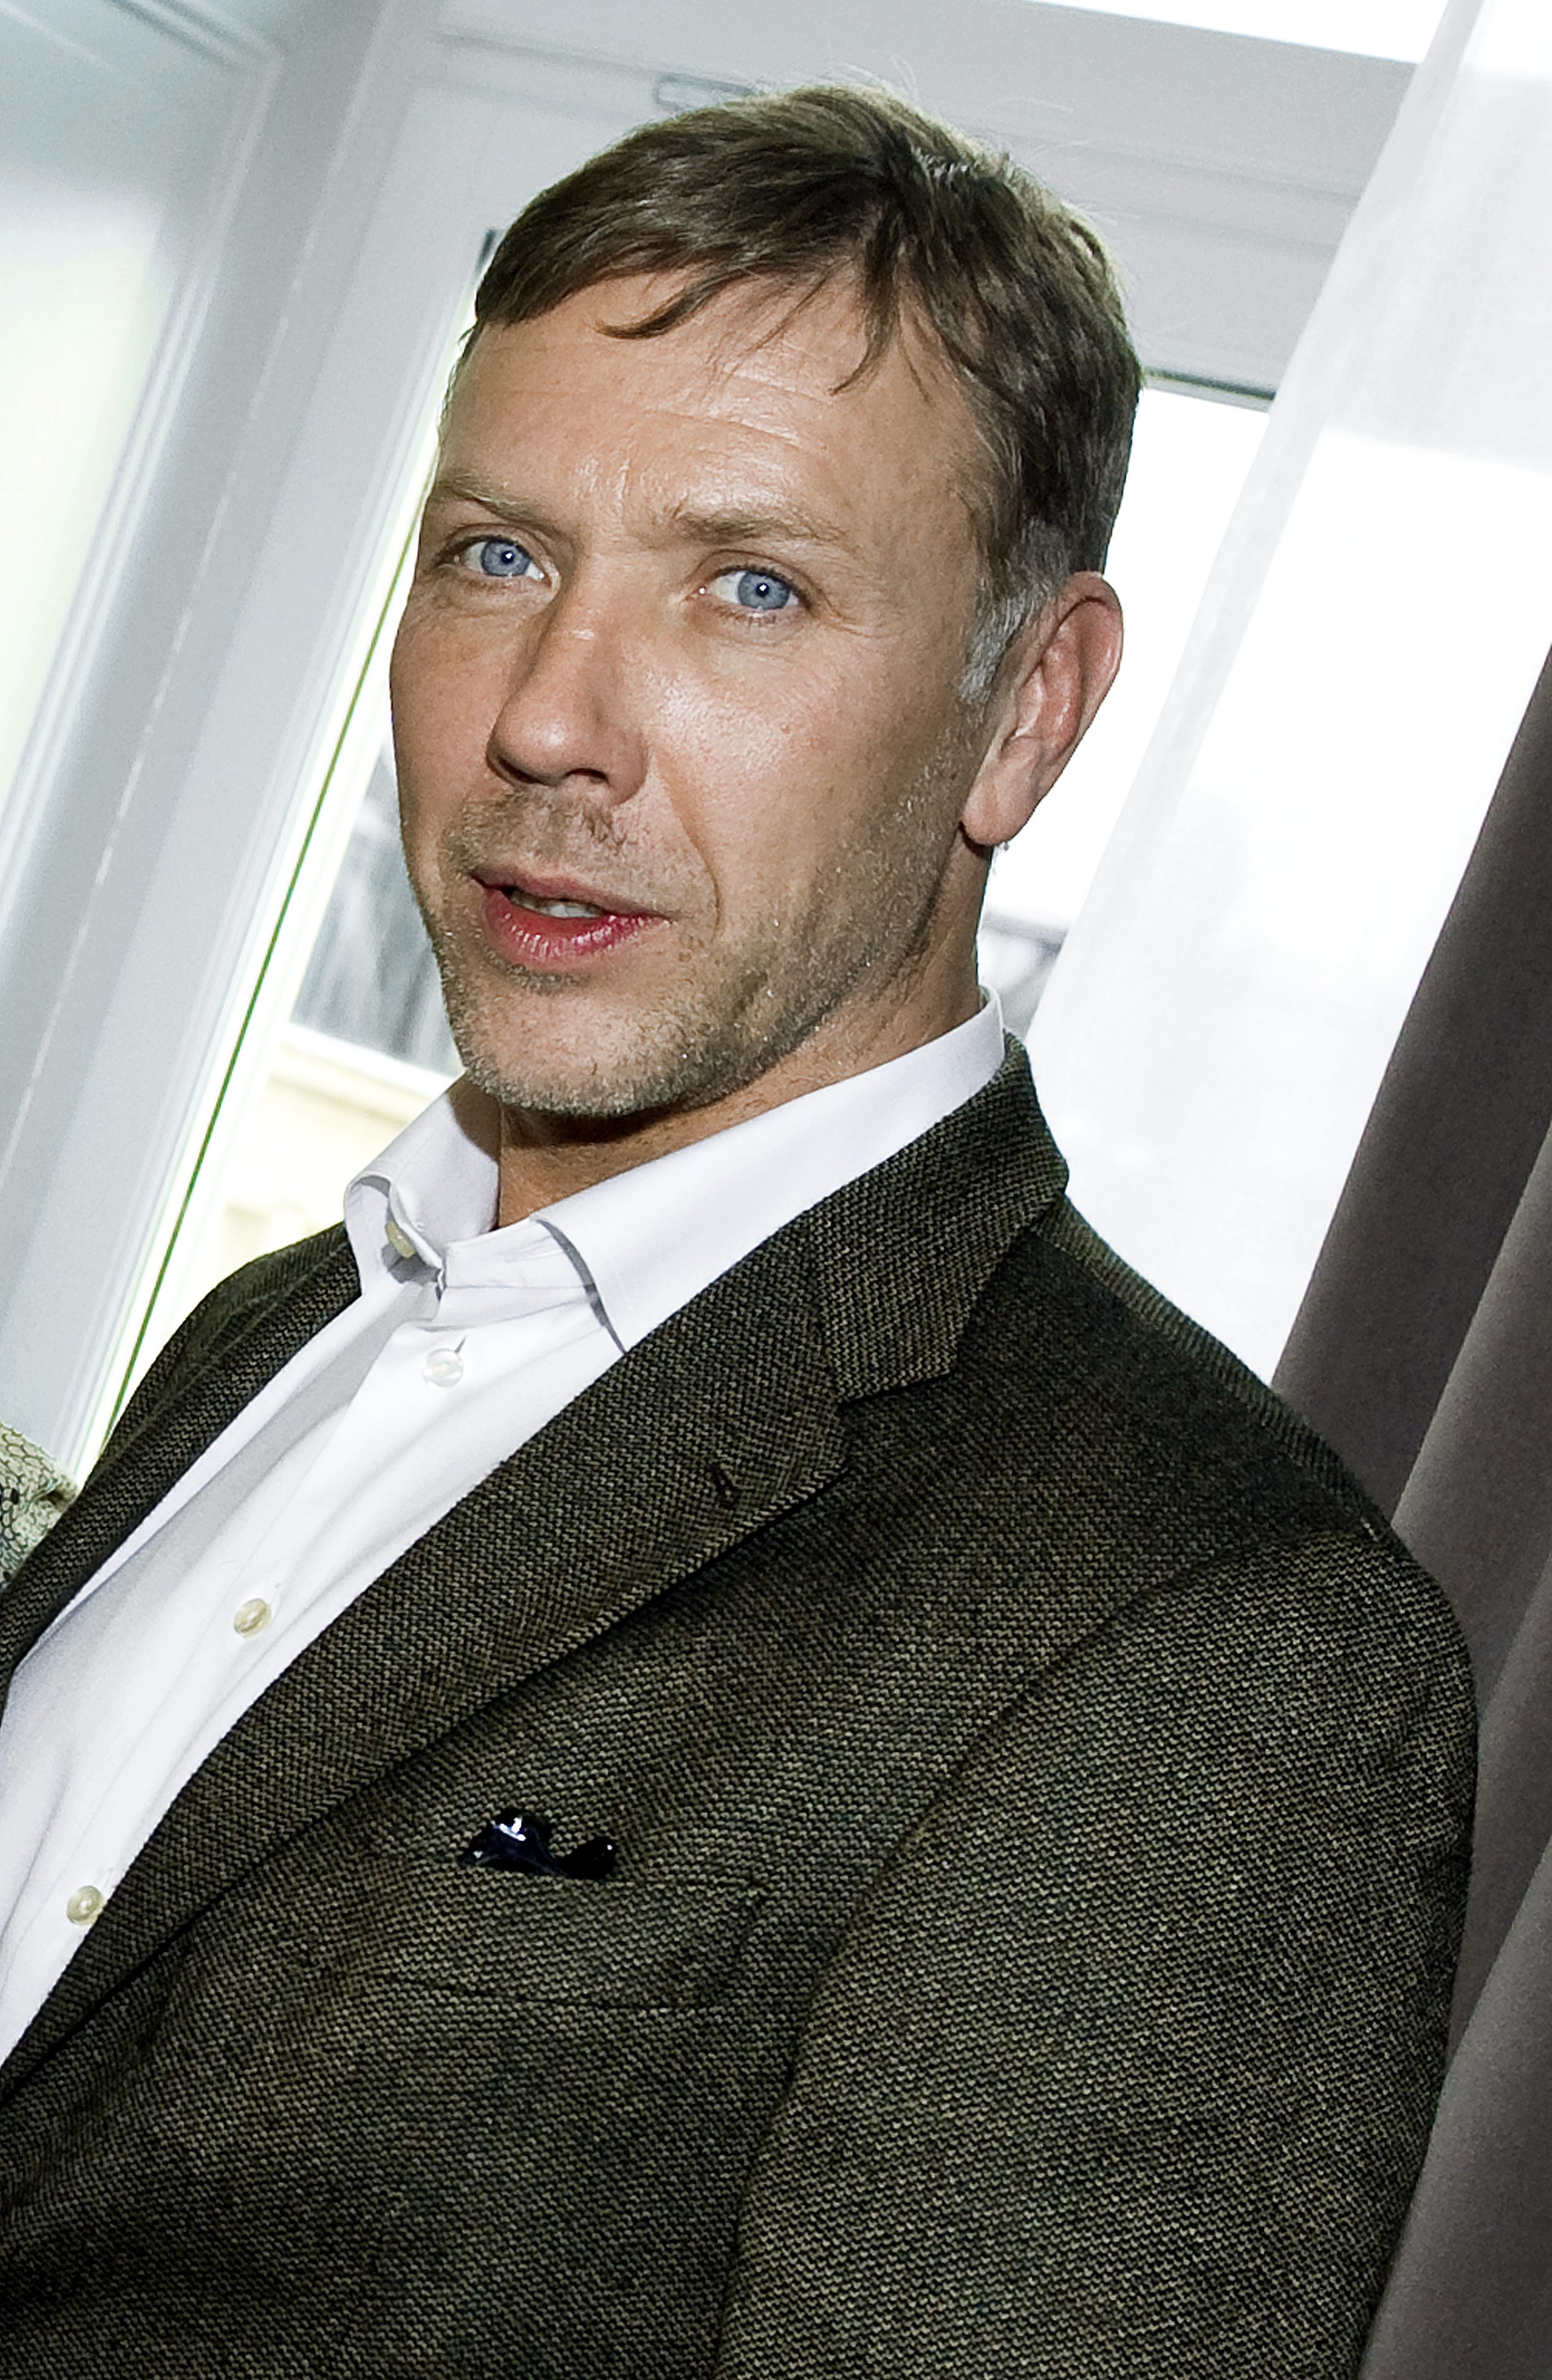 Film, Ola Rapace, Hollywood, Fight, Slåss, Mikael Persbrandt